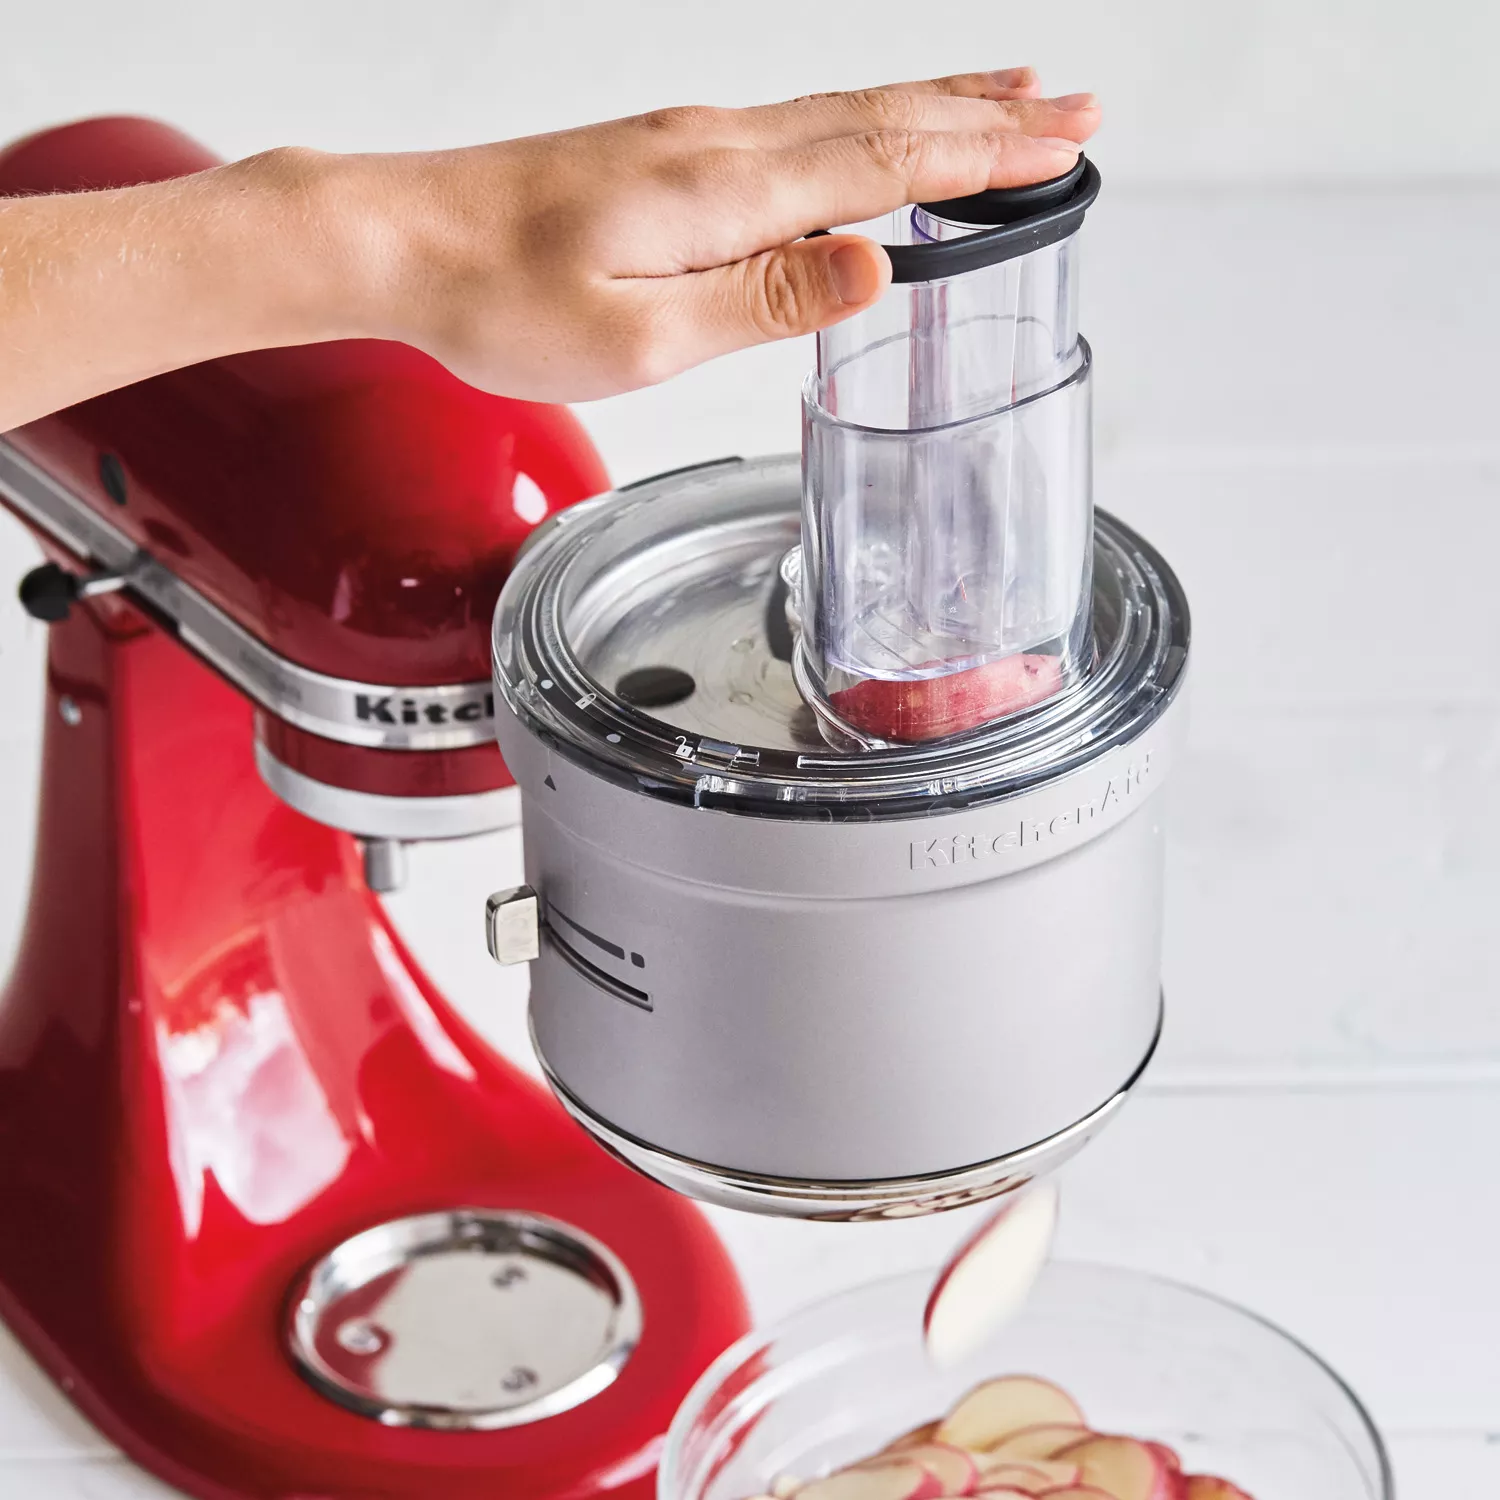 KitchenAid Food Processor with Dicing Kit Stand Mixer Attachment